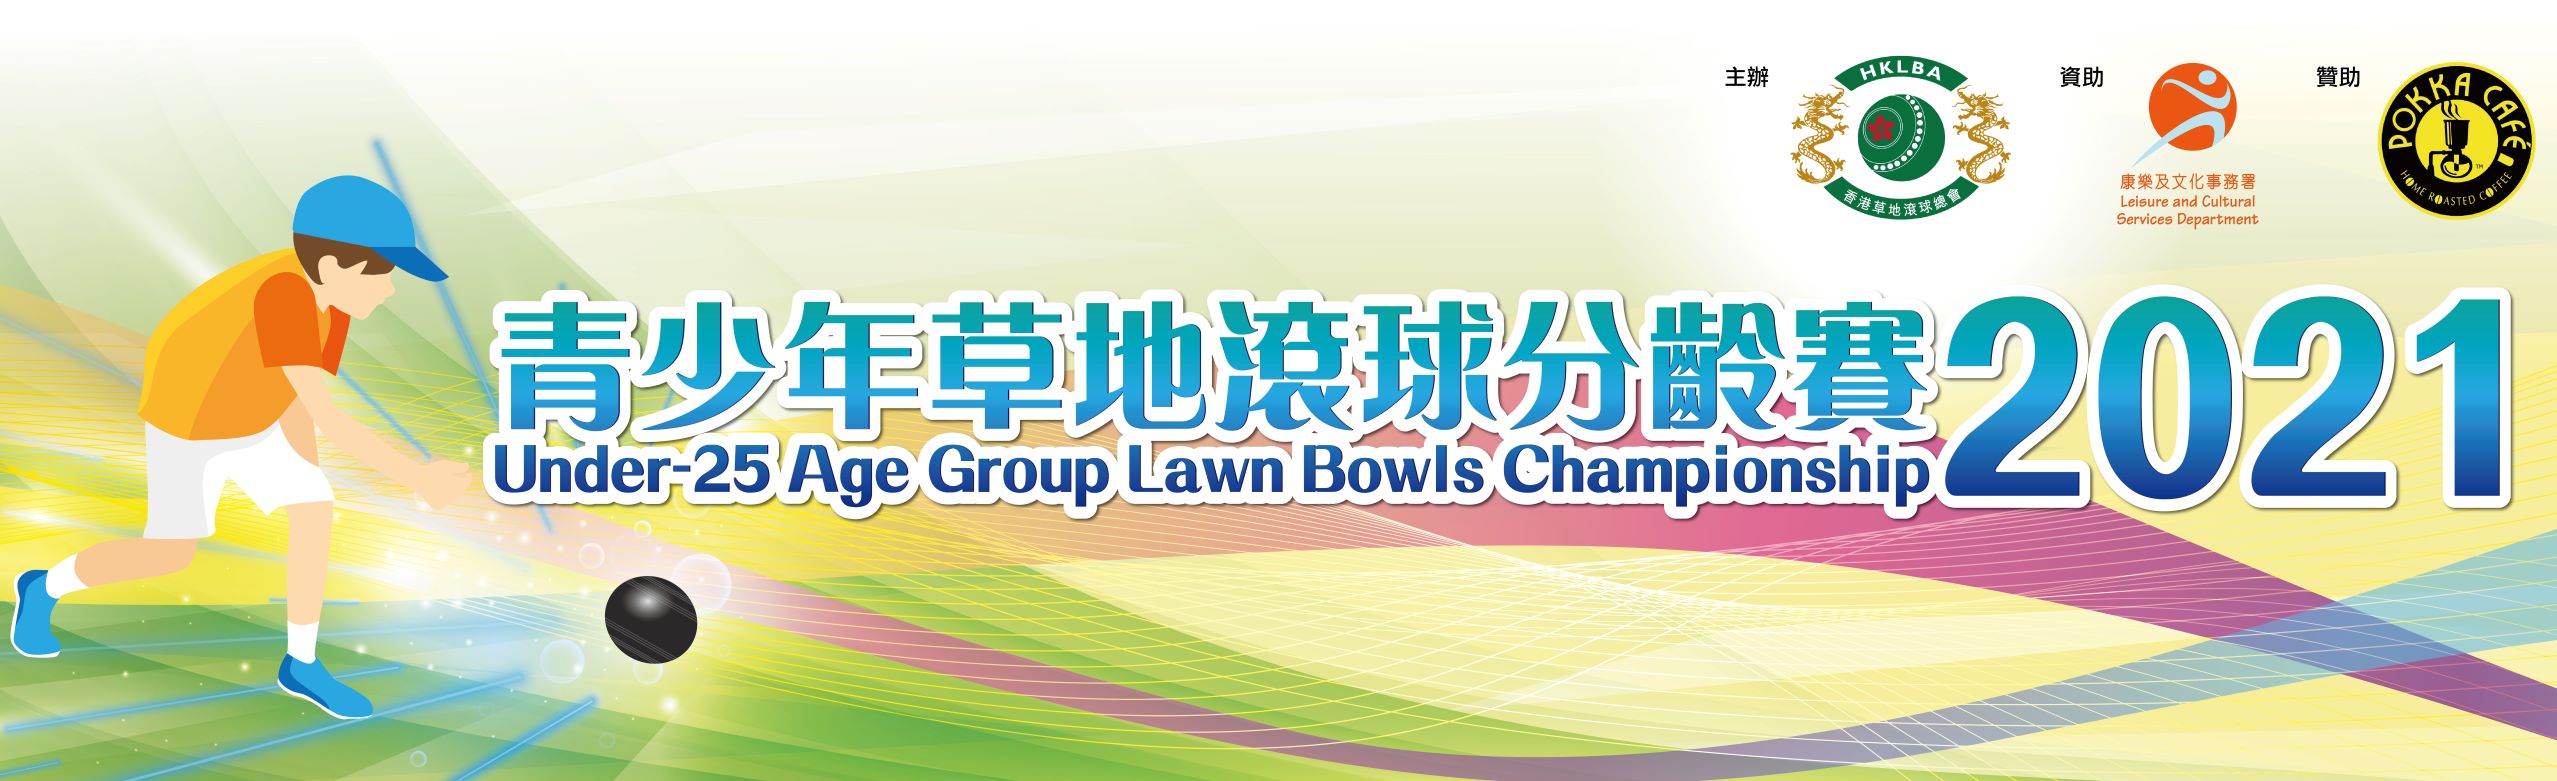 Under-25 Age Group Lawn Bowls Championship 2021 (Updated on 29/7/21)